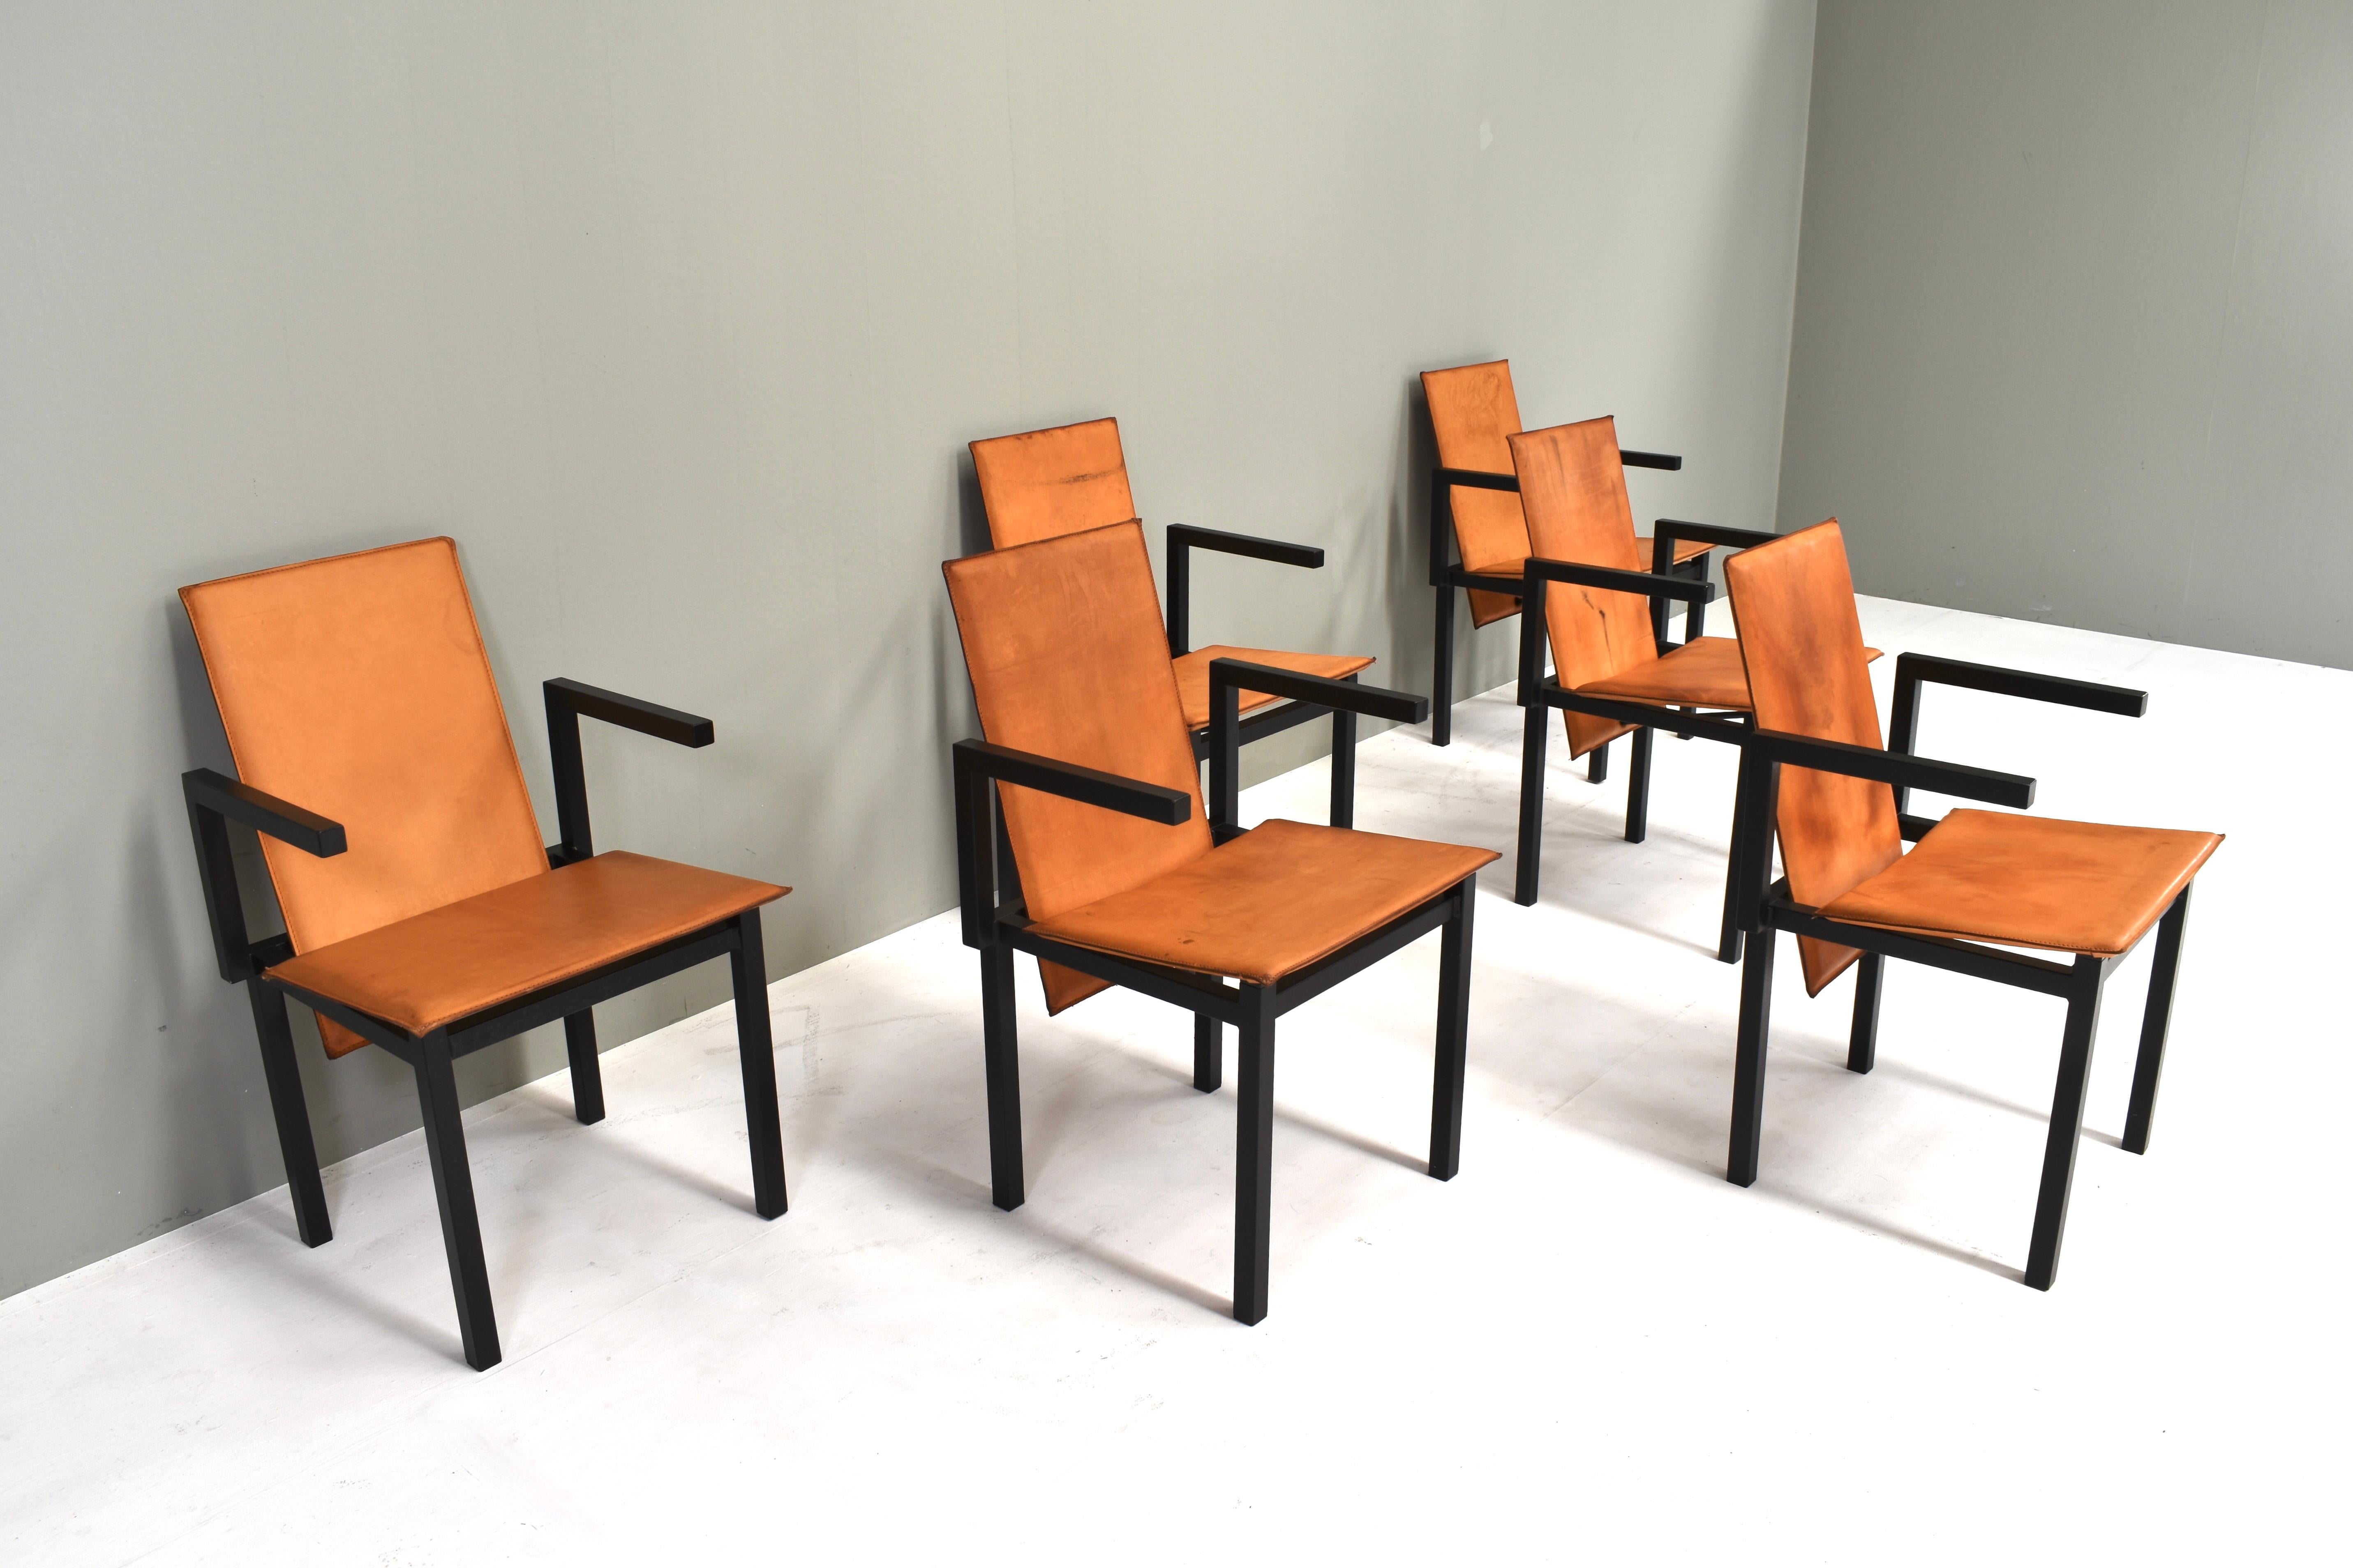 Unique set of six minimalistic dining chairs in black coated metal and cognac leather. This is a one of a kind set custom made to order or as prototypes.
They come from a the Groninger Art Museum in Groningen, The Netherlands.
The angle of the backs